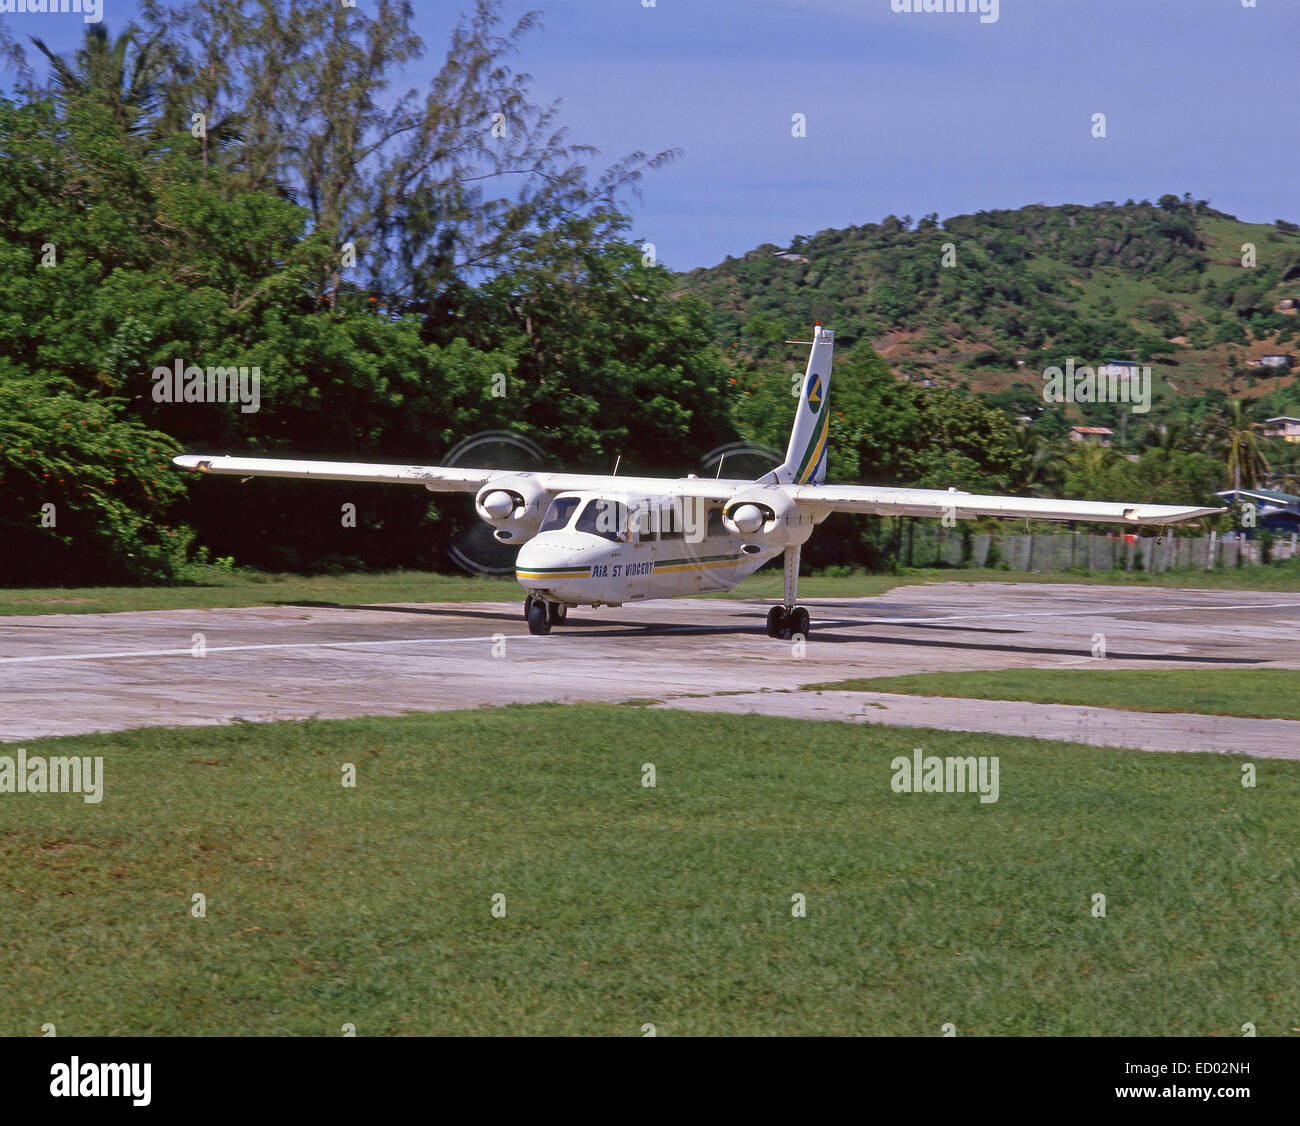 Air St Vincent light aircraft taxing on runway, Saint Vincent, Saint Vincent and the Grenadines, The Lesser Antilles, Caribbean Stock Photo